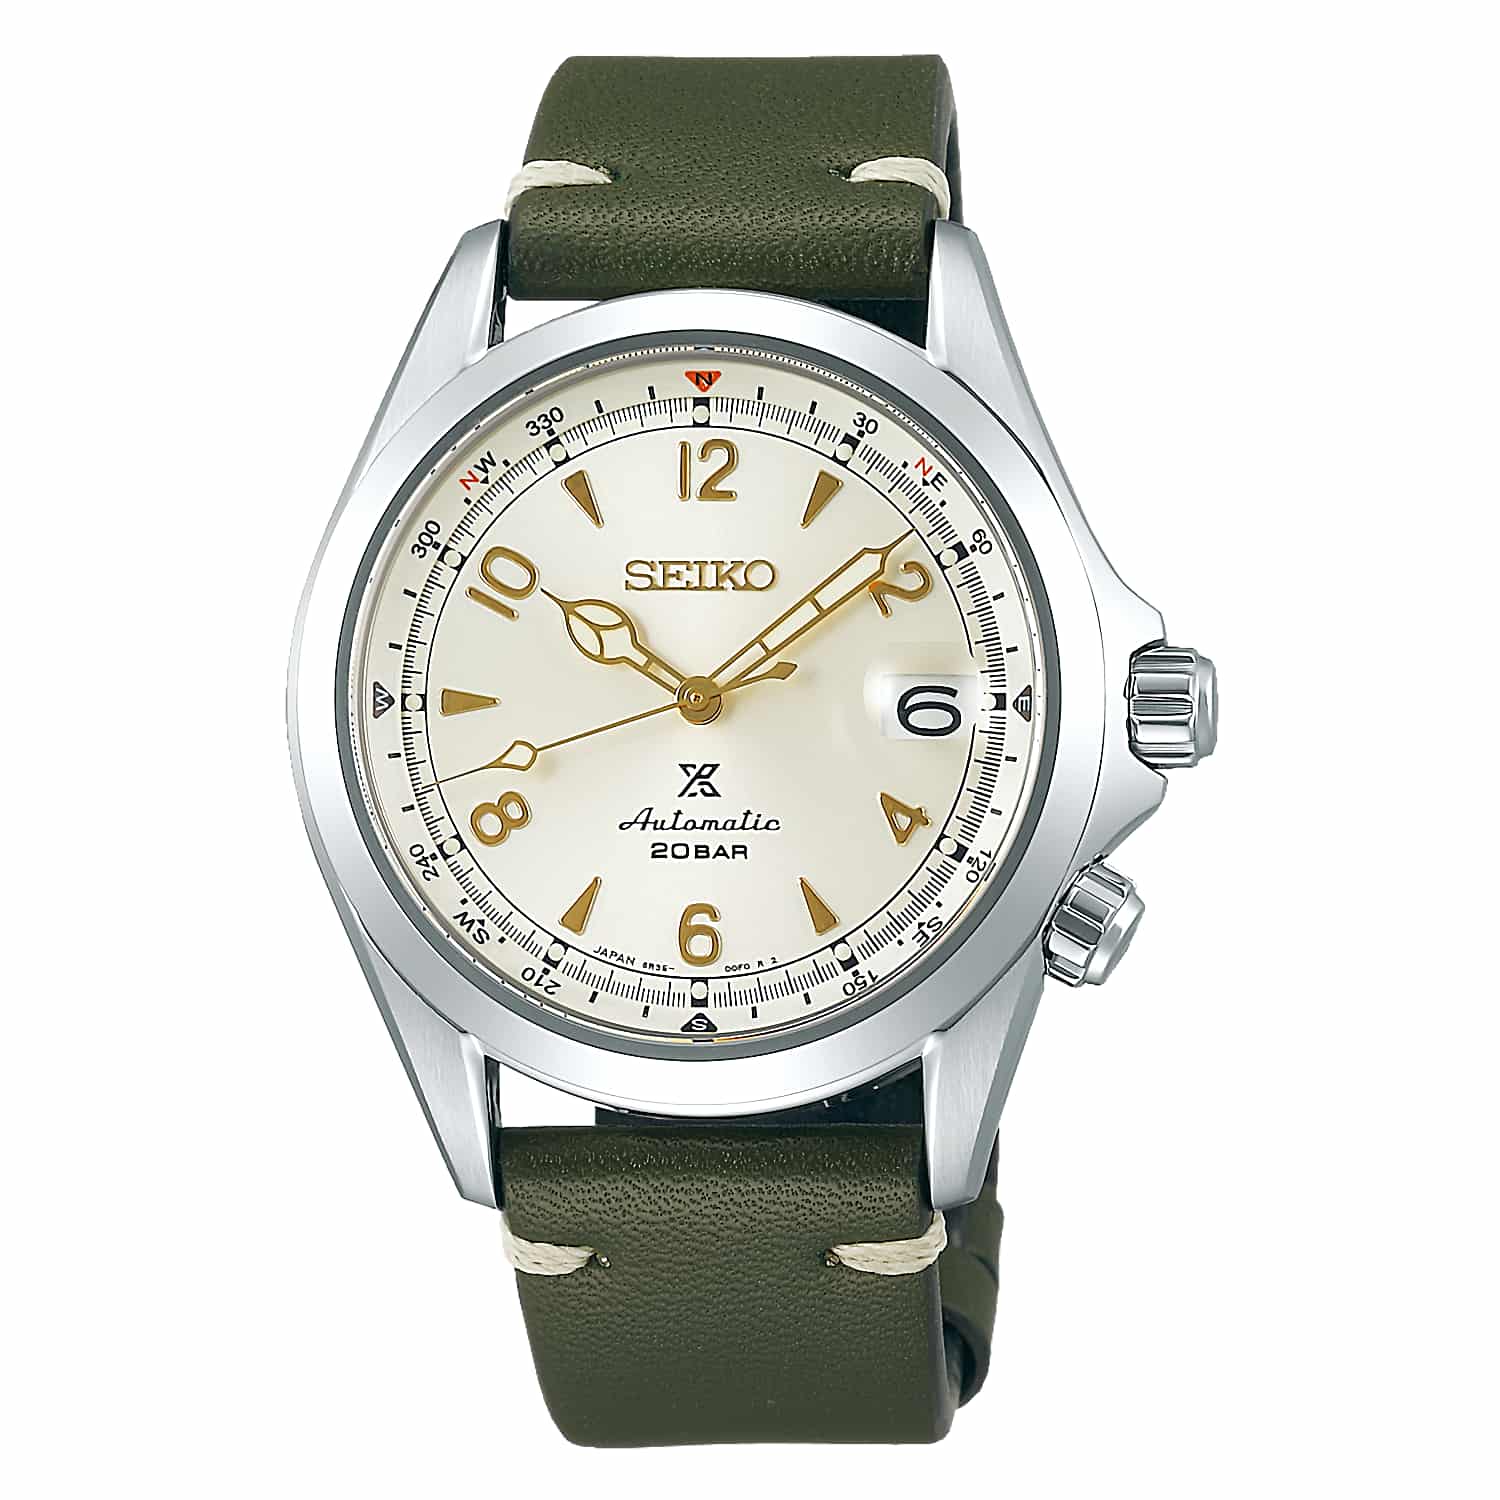 SPB123J1 SEIKO Prospex Alpinist Cream Gilt Watch. The newest Seiko Prospex Alpinist Cream Gilt SPB123J1, rarest of the other three, joins the pioneers to have a new movement; powered by Seiko’s latest automatic caliber, 6R35, which is an upgrade from the 